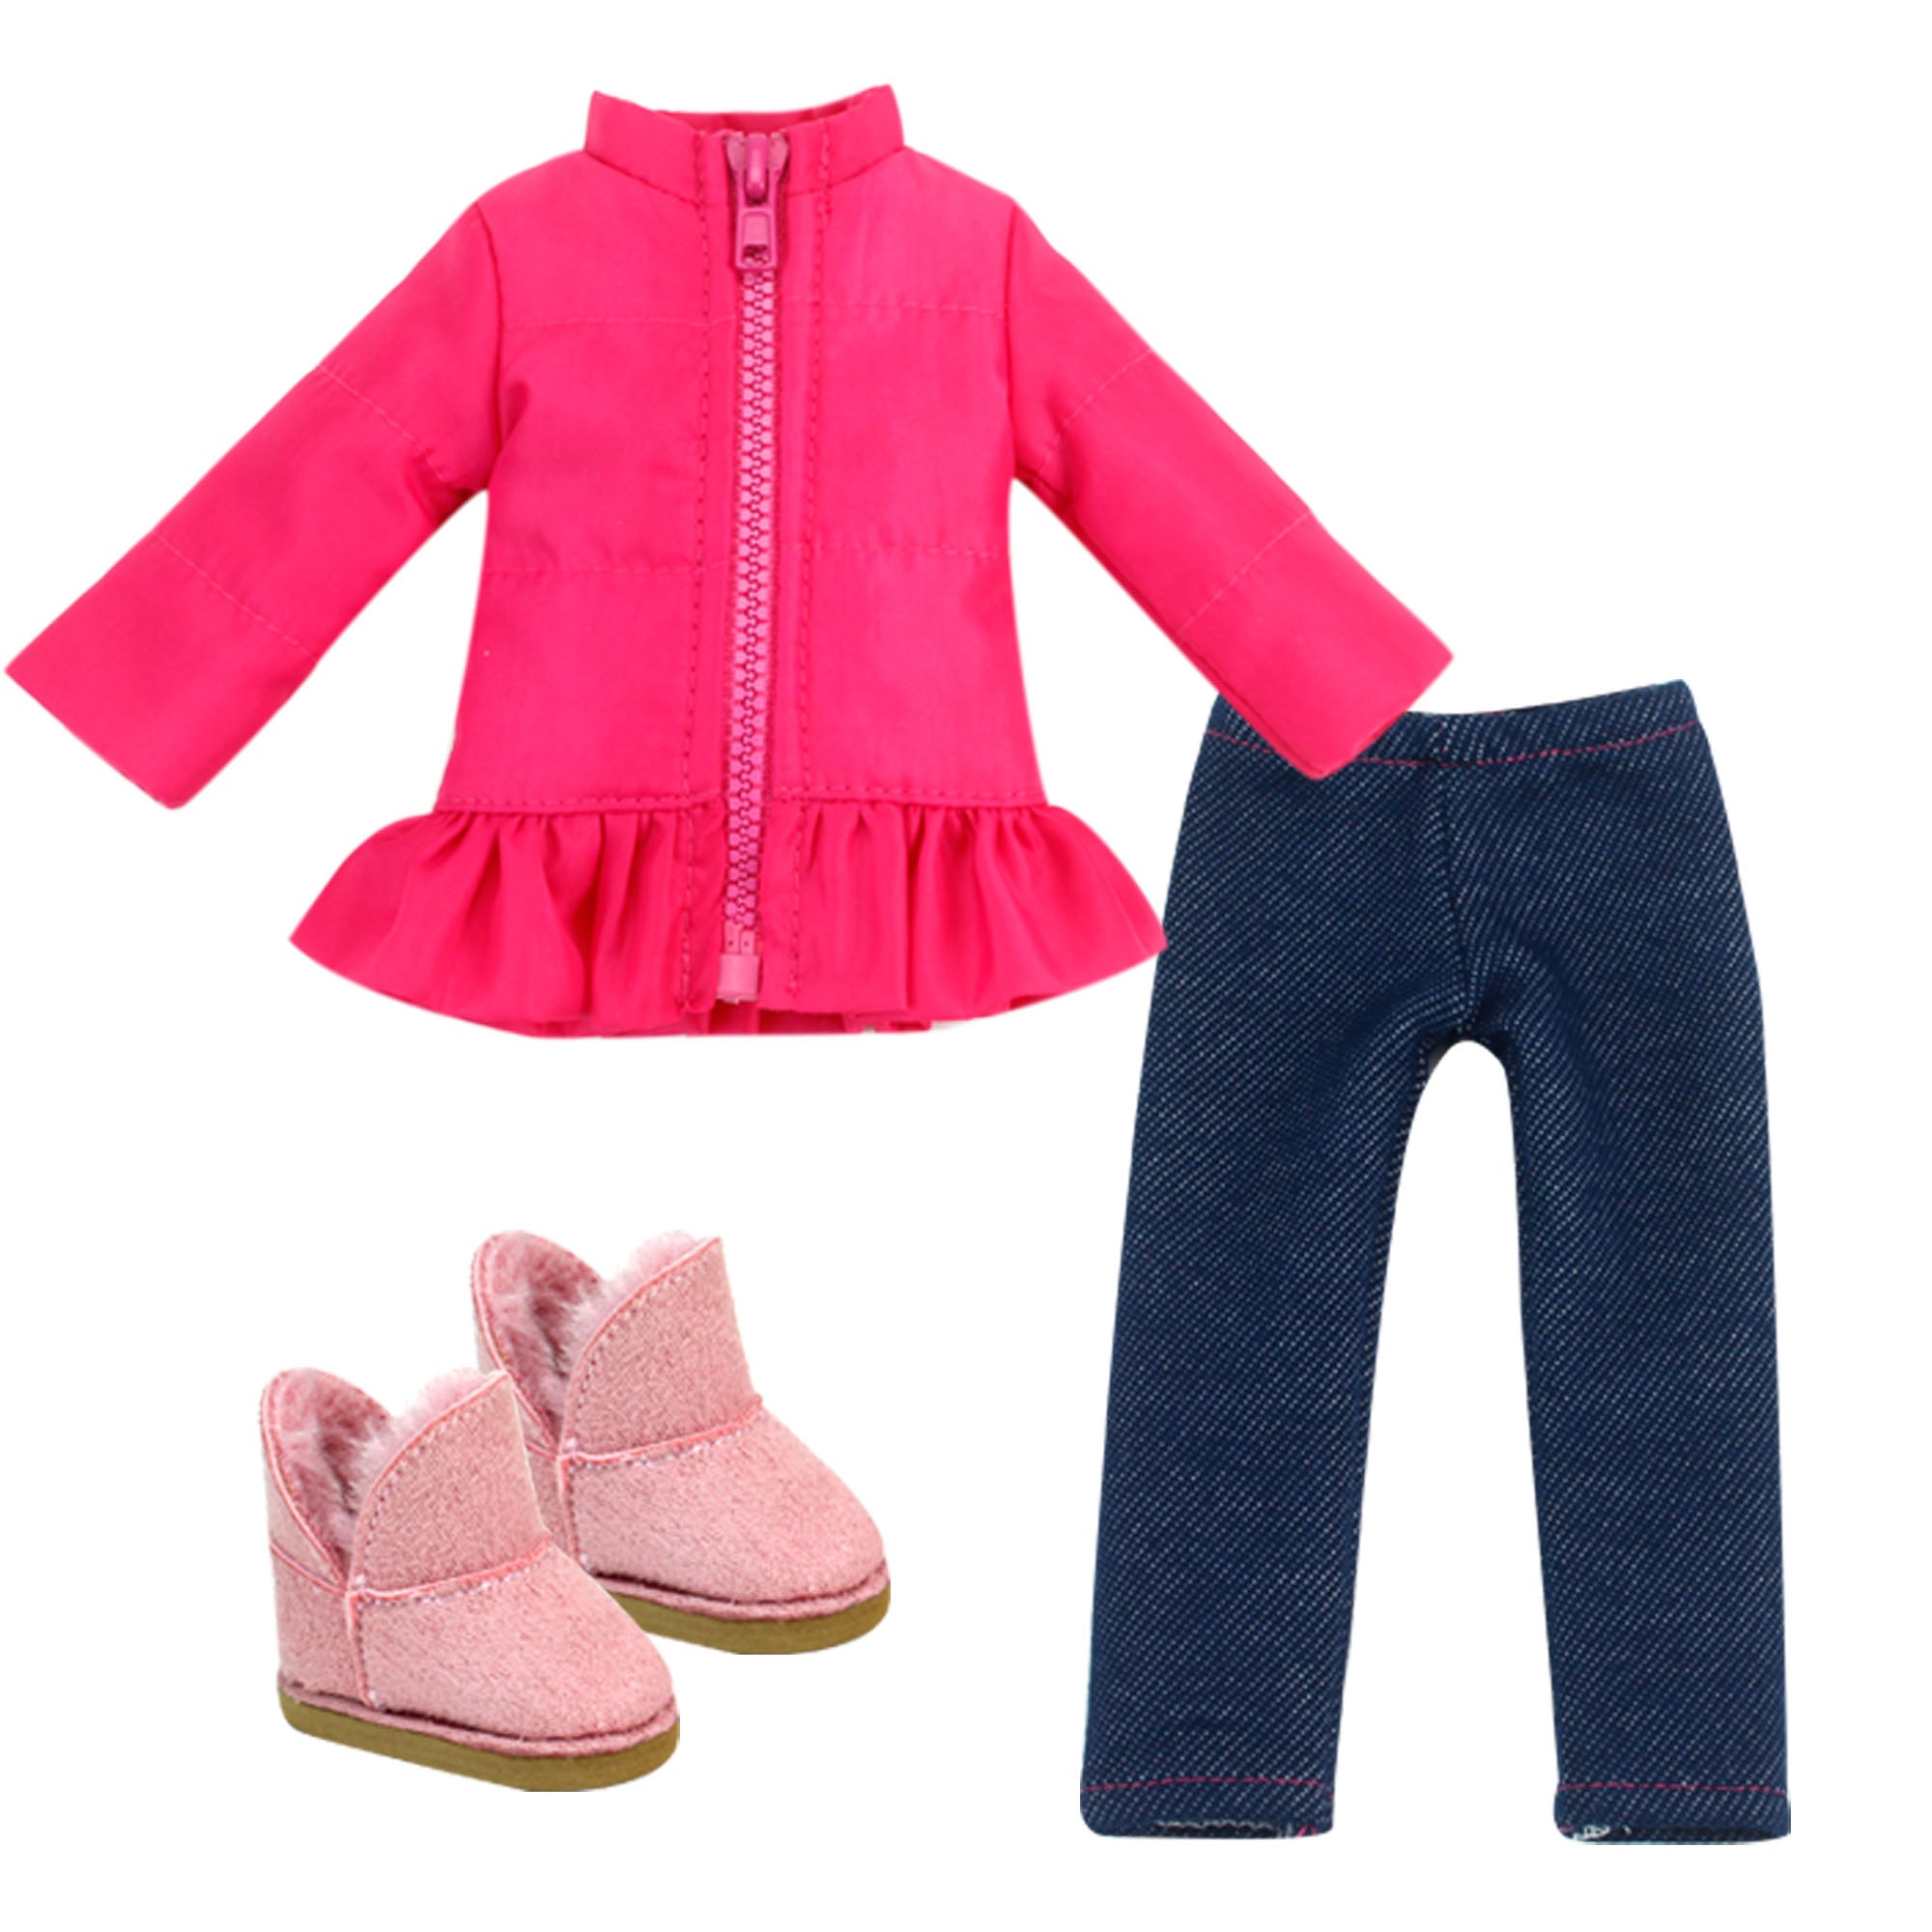 Sophia's 3 Piece Winter Outfit with Boots for 14.5" Dolls, Hot Pink